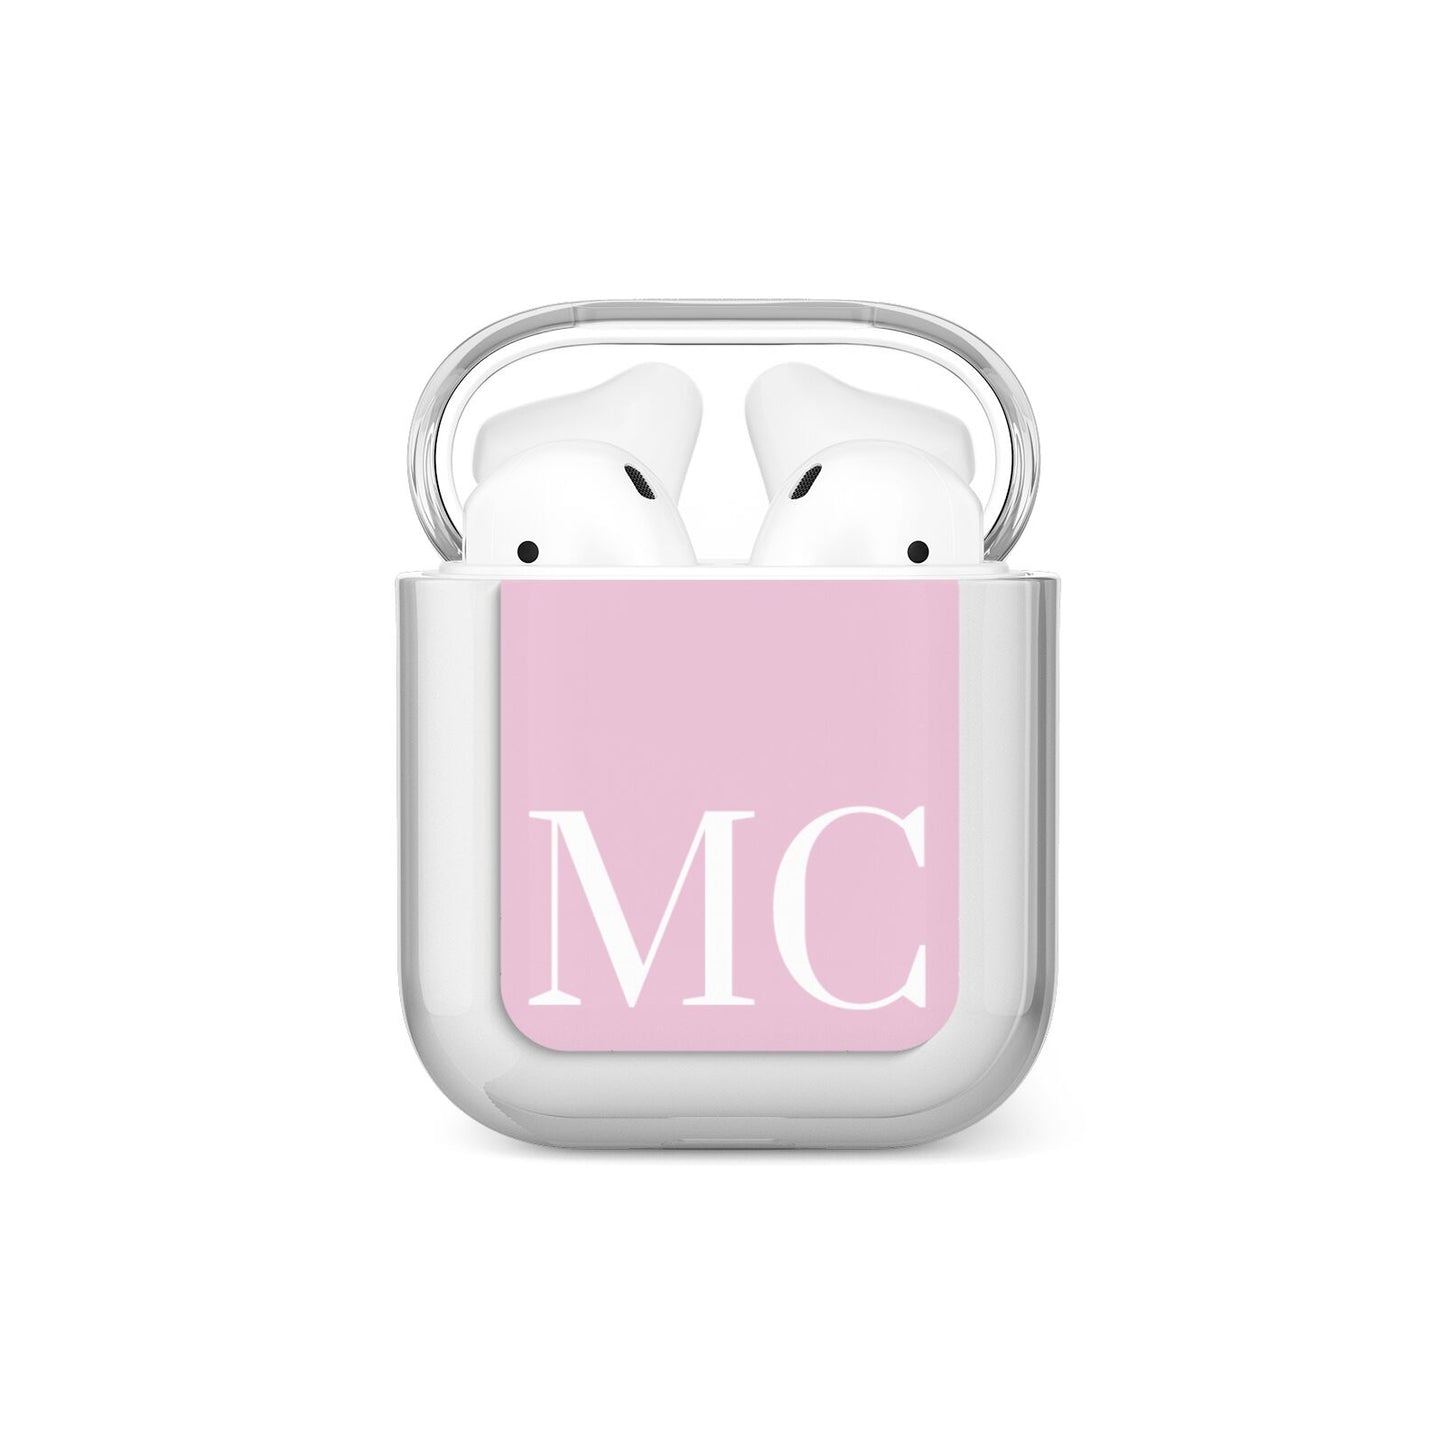 Initials Personalised 2 AirPods Case